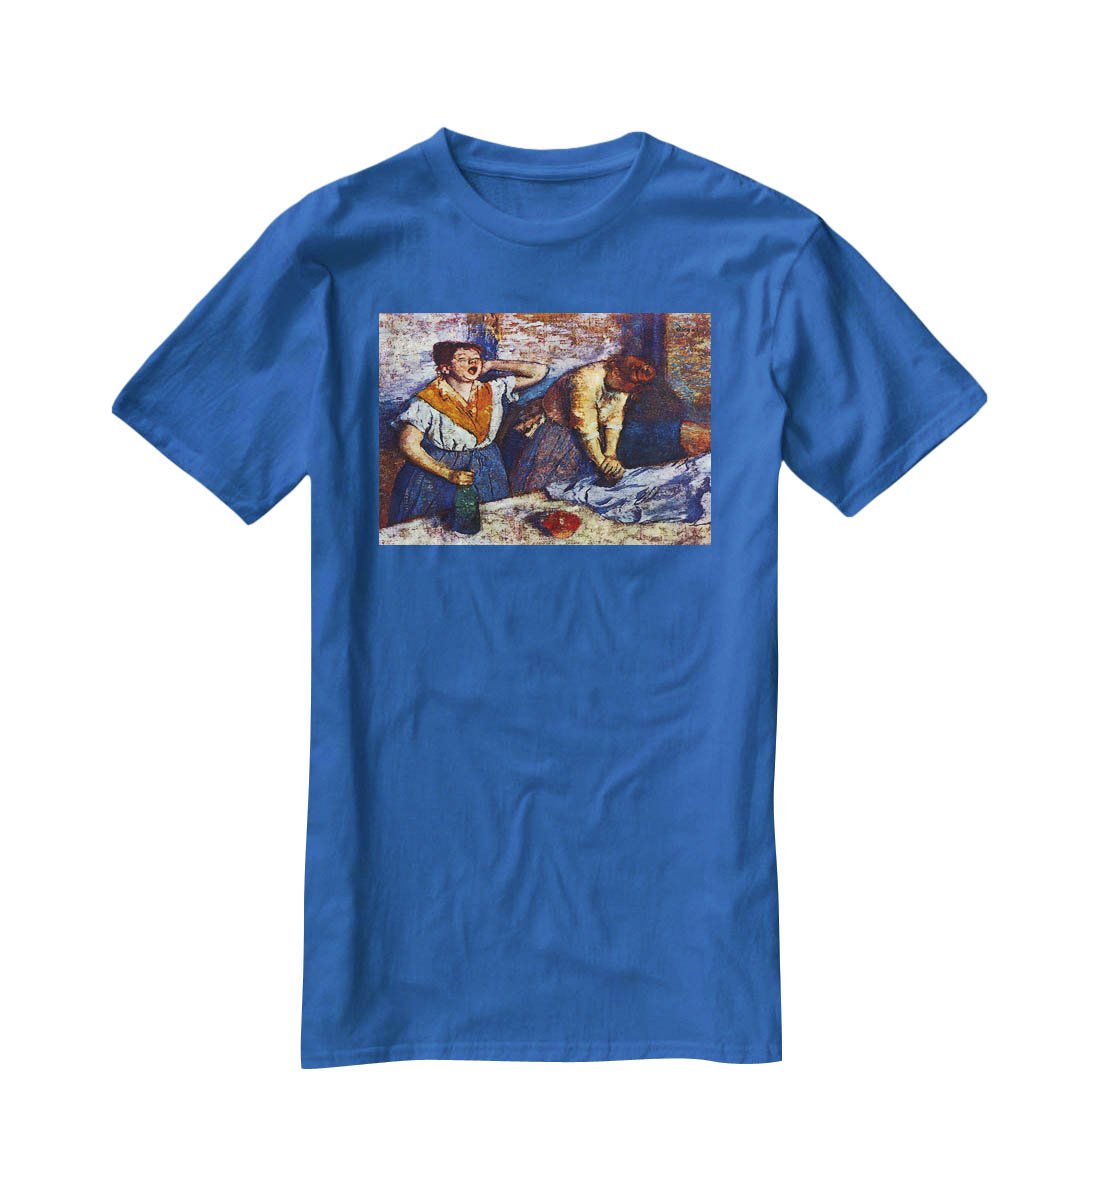 Two cleaning women by Degas T-Shirt - Canvas Art Rocks - 2